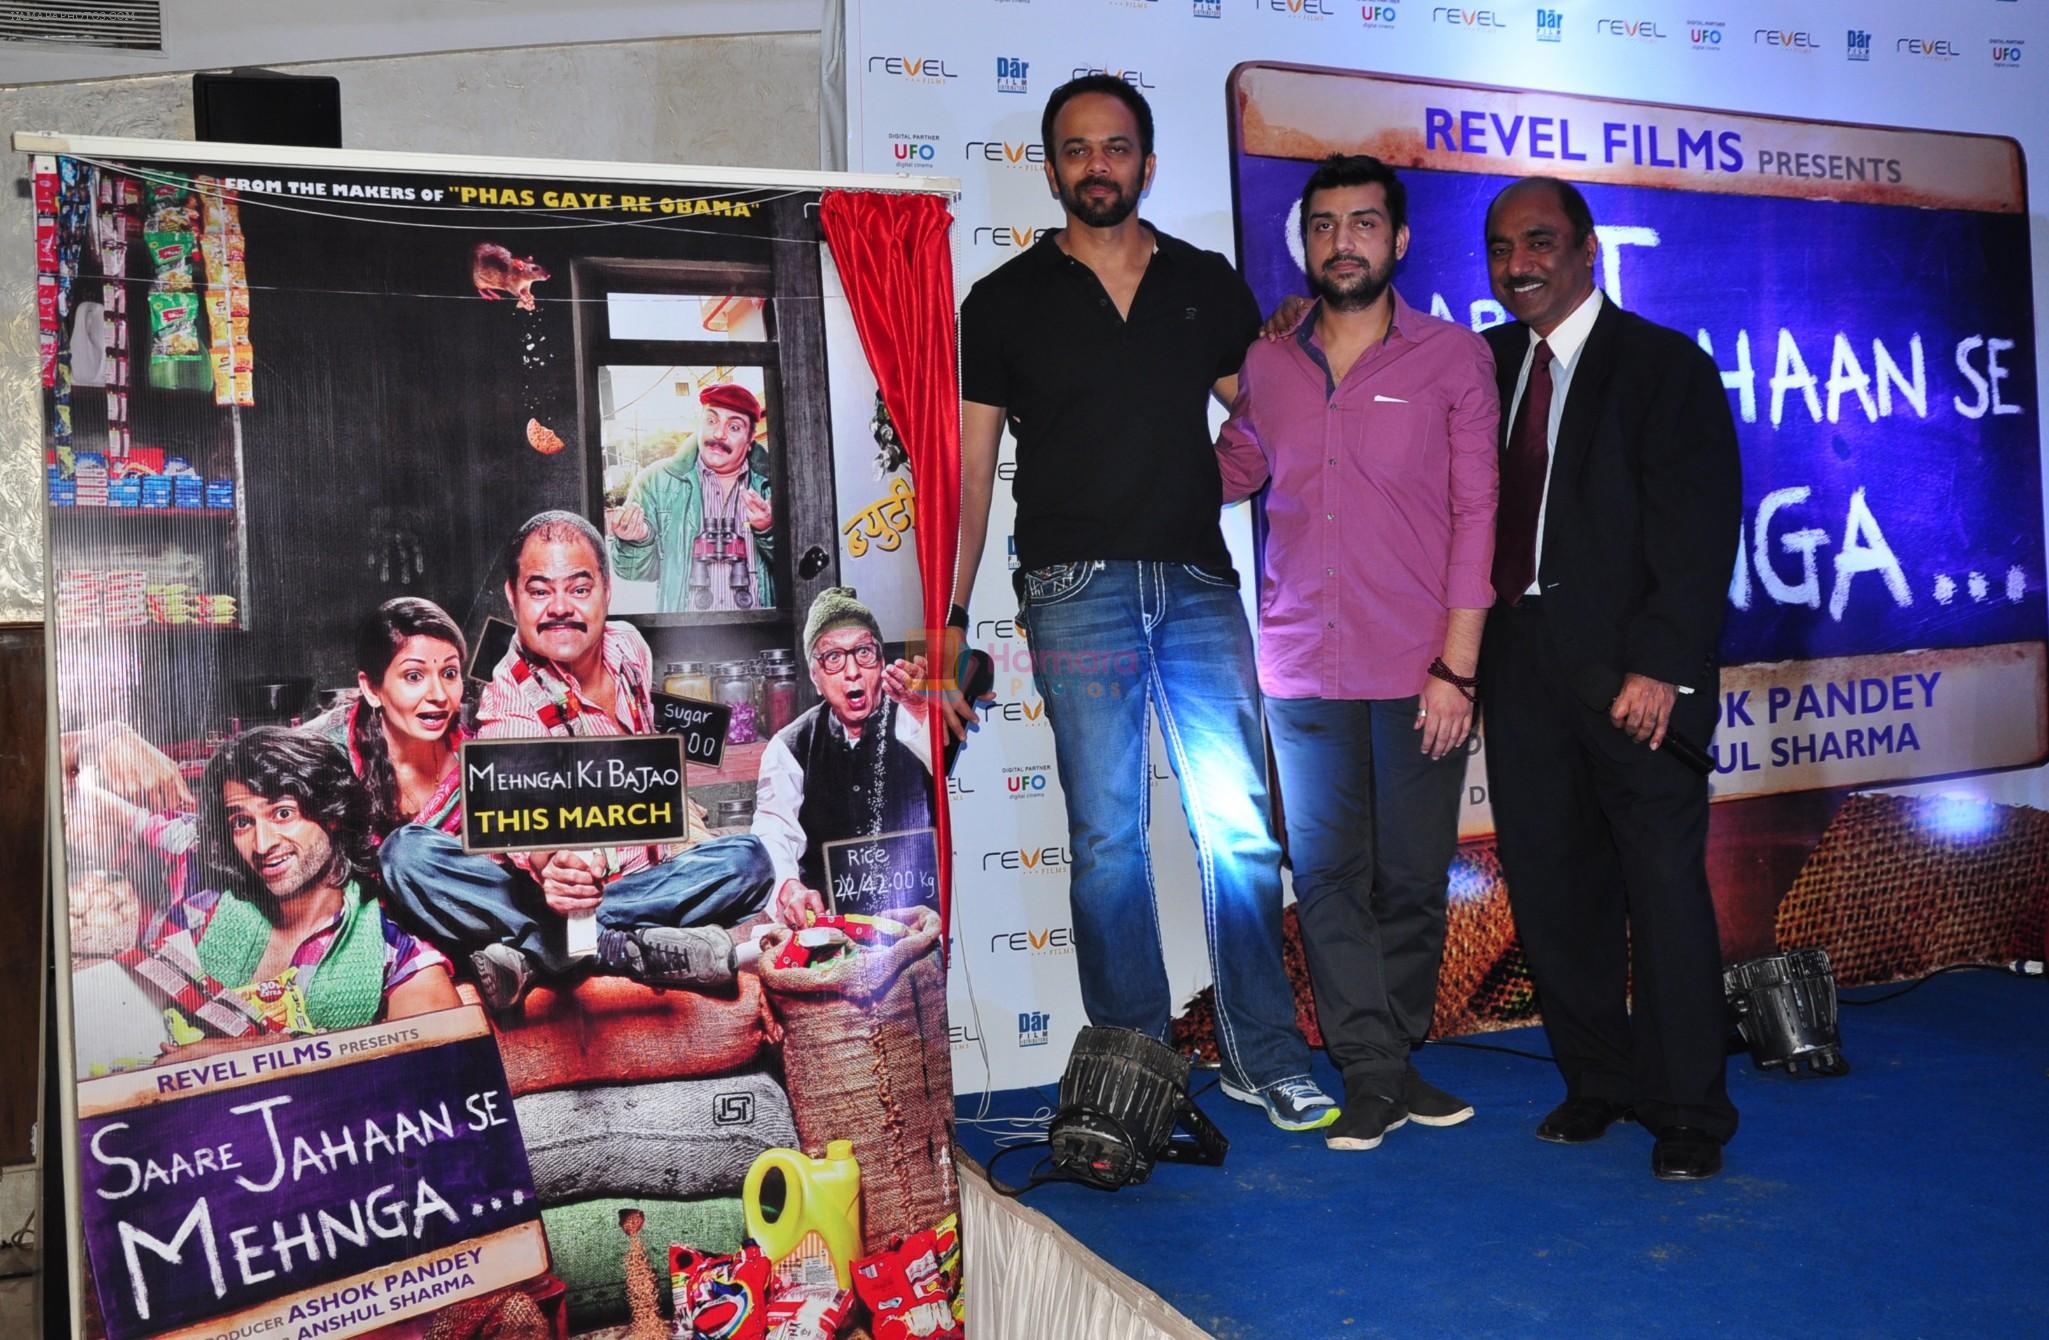 Rohit Shetty at the unveiling of Saare Jahaan Se Mehnga poster for Anshul Sharma & Ashok Pandey  